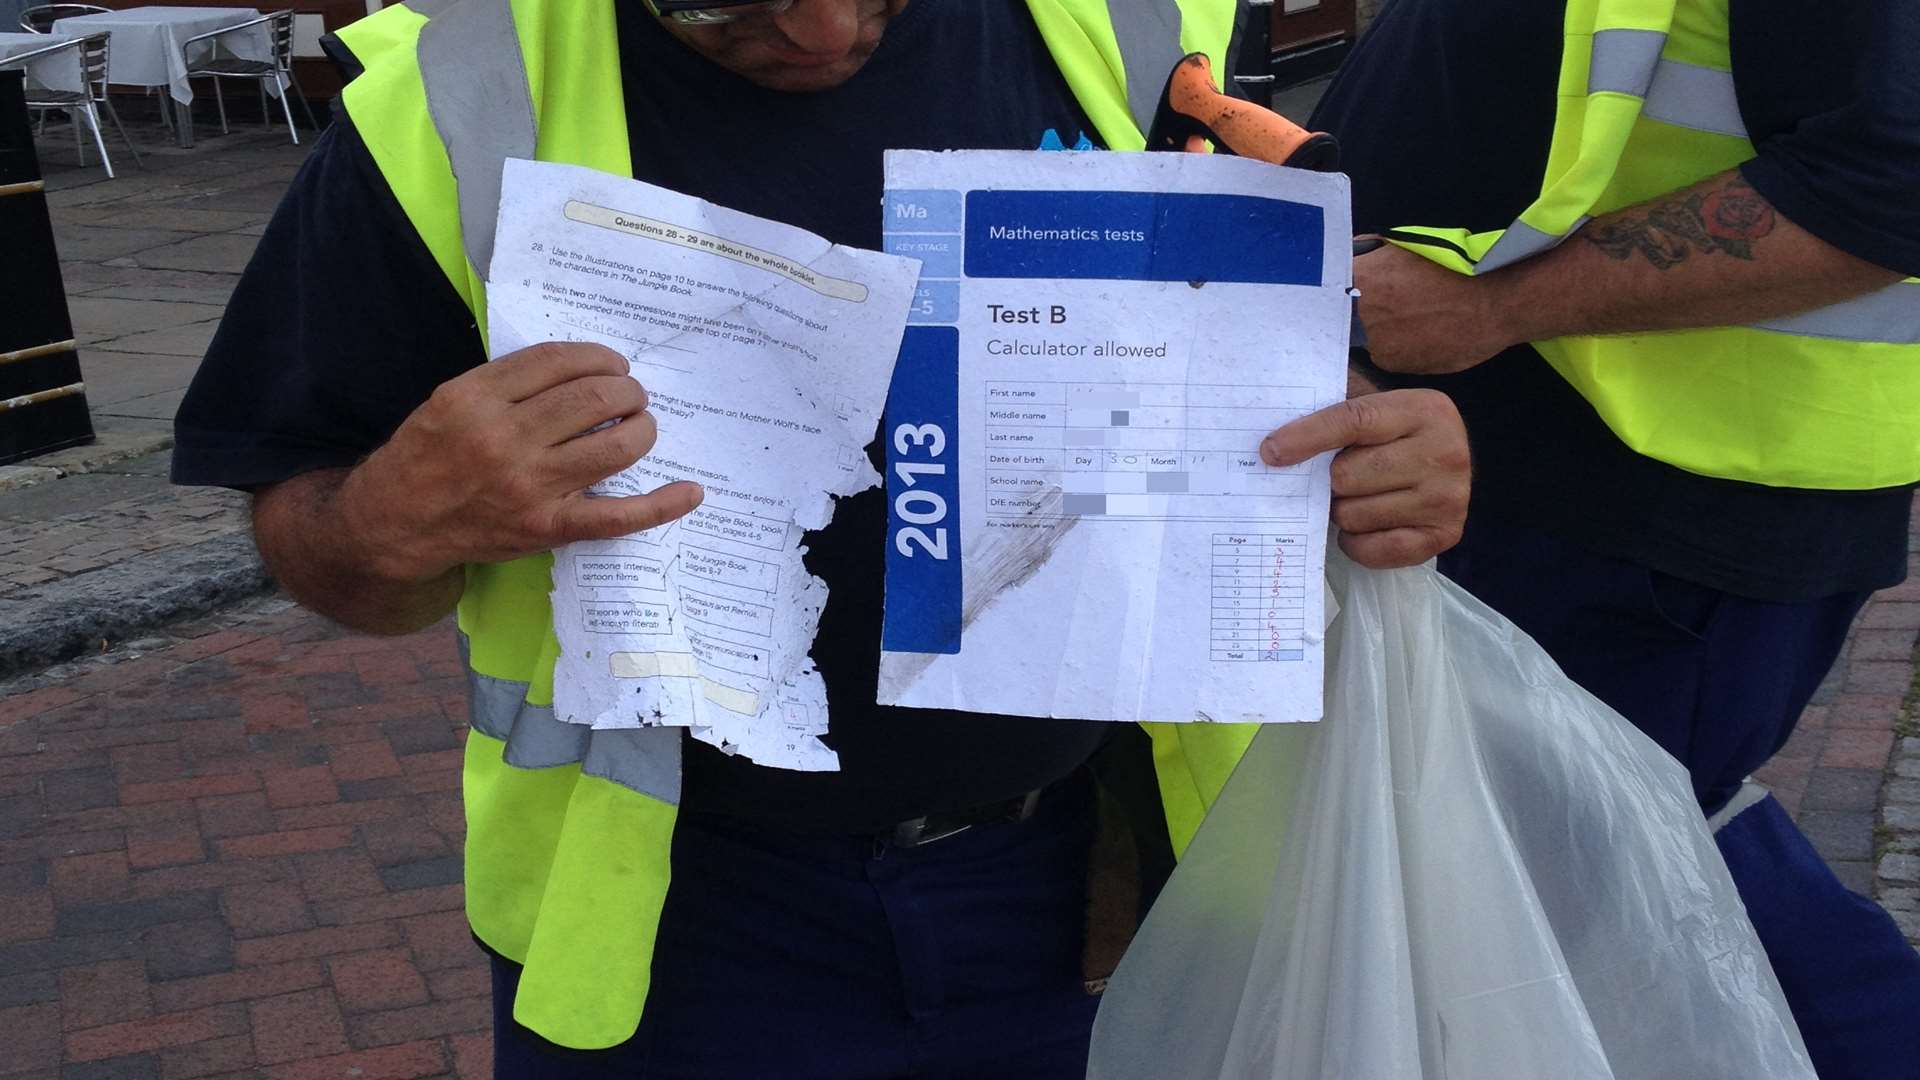 Cleaners were told to clear up what appears to be exam papers